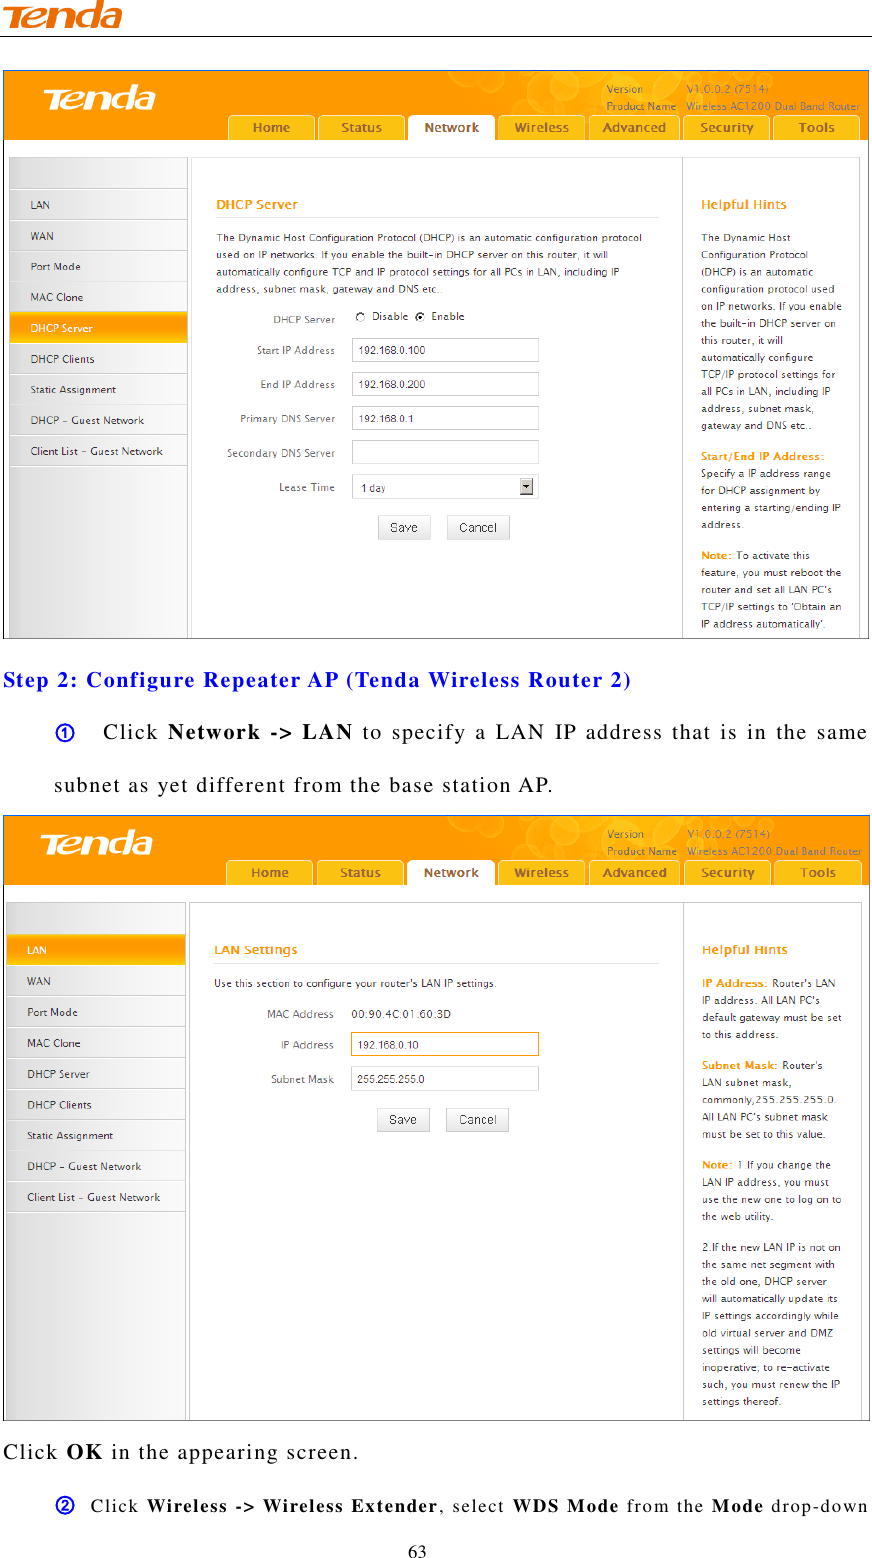                                    63  Step 2: Configure Repeater AP (Tenda Wireless Router 2) ①   Click Network -&gt; LAN  to specify a  LAN  IP  address  that is in  the  same subnet as yet different from the base station AP.  Click OK in the appearing screen. ② Click Wireless -&gt; Wireless Extender, select  WDS Mode from the Mode drop-down 